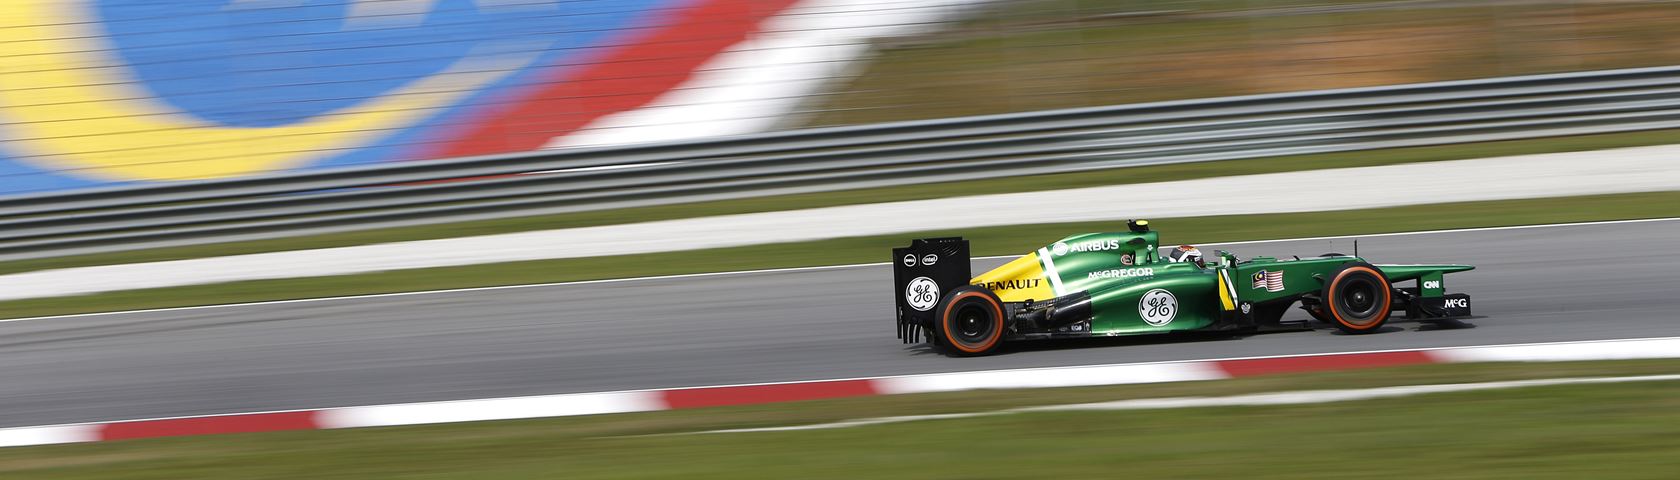 Caterham Renault in Malaysia